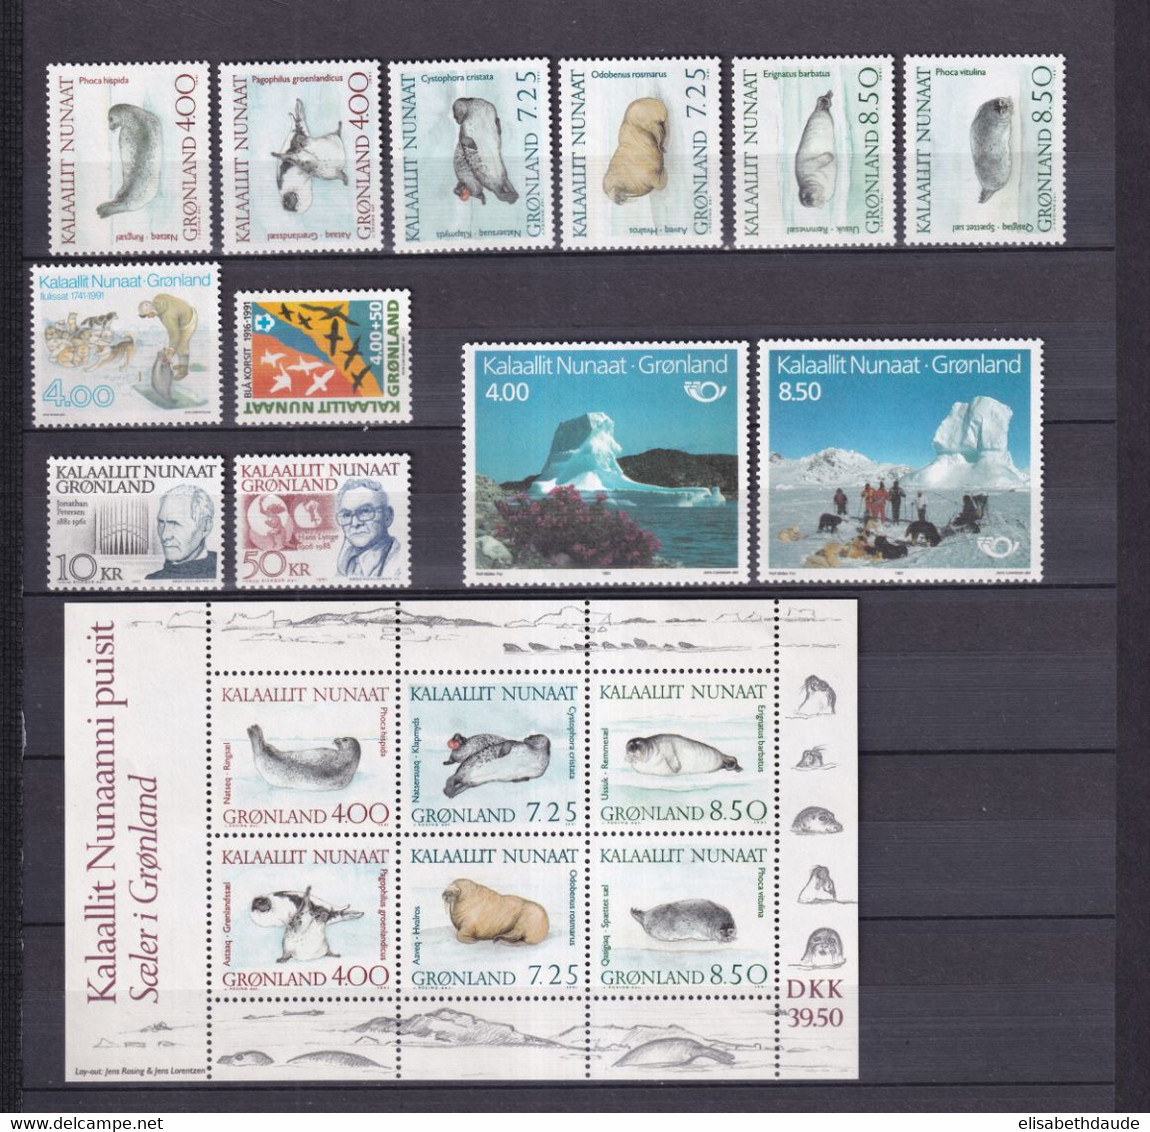 GROENLAND - ANNEE COMPLETE 1991 - YVERT N°199/210 + BF3 ** MNH - COTE = 91.5 EUR - - Années Complètes